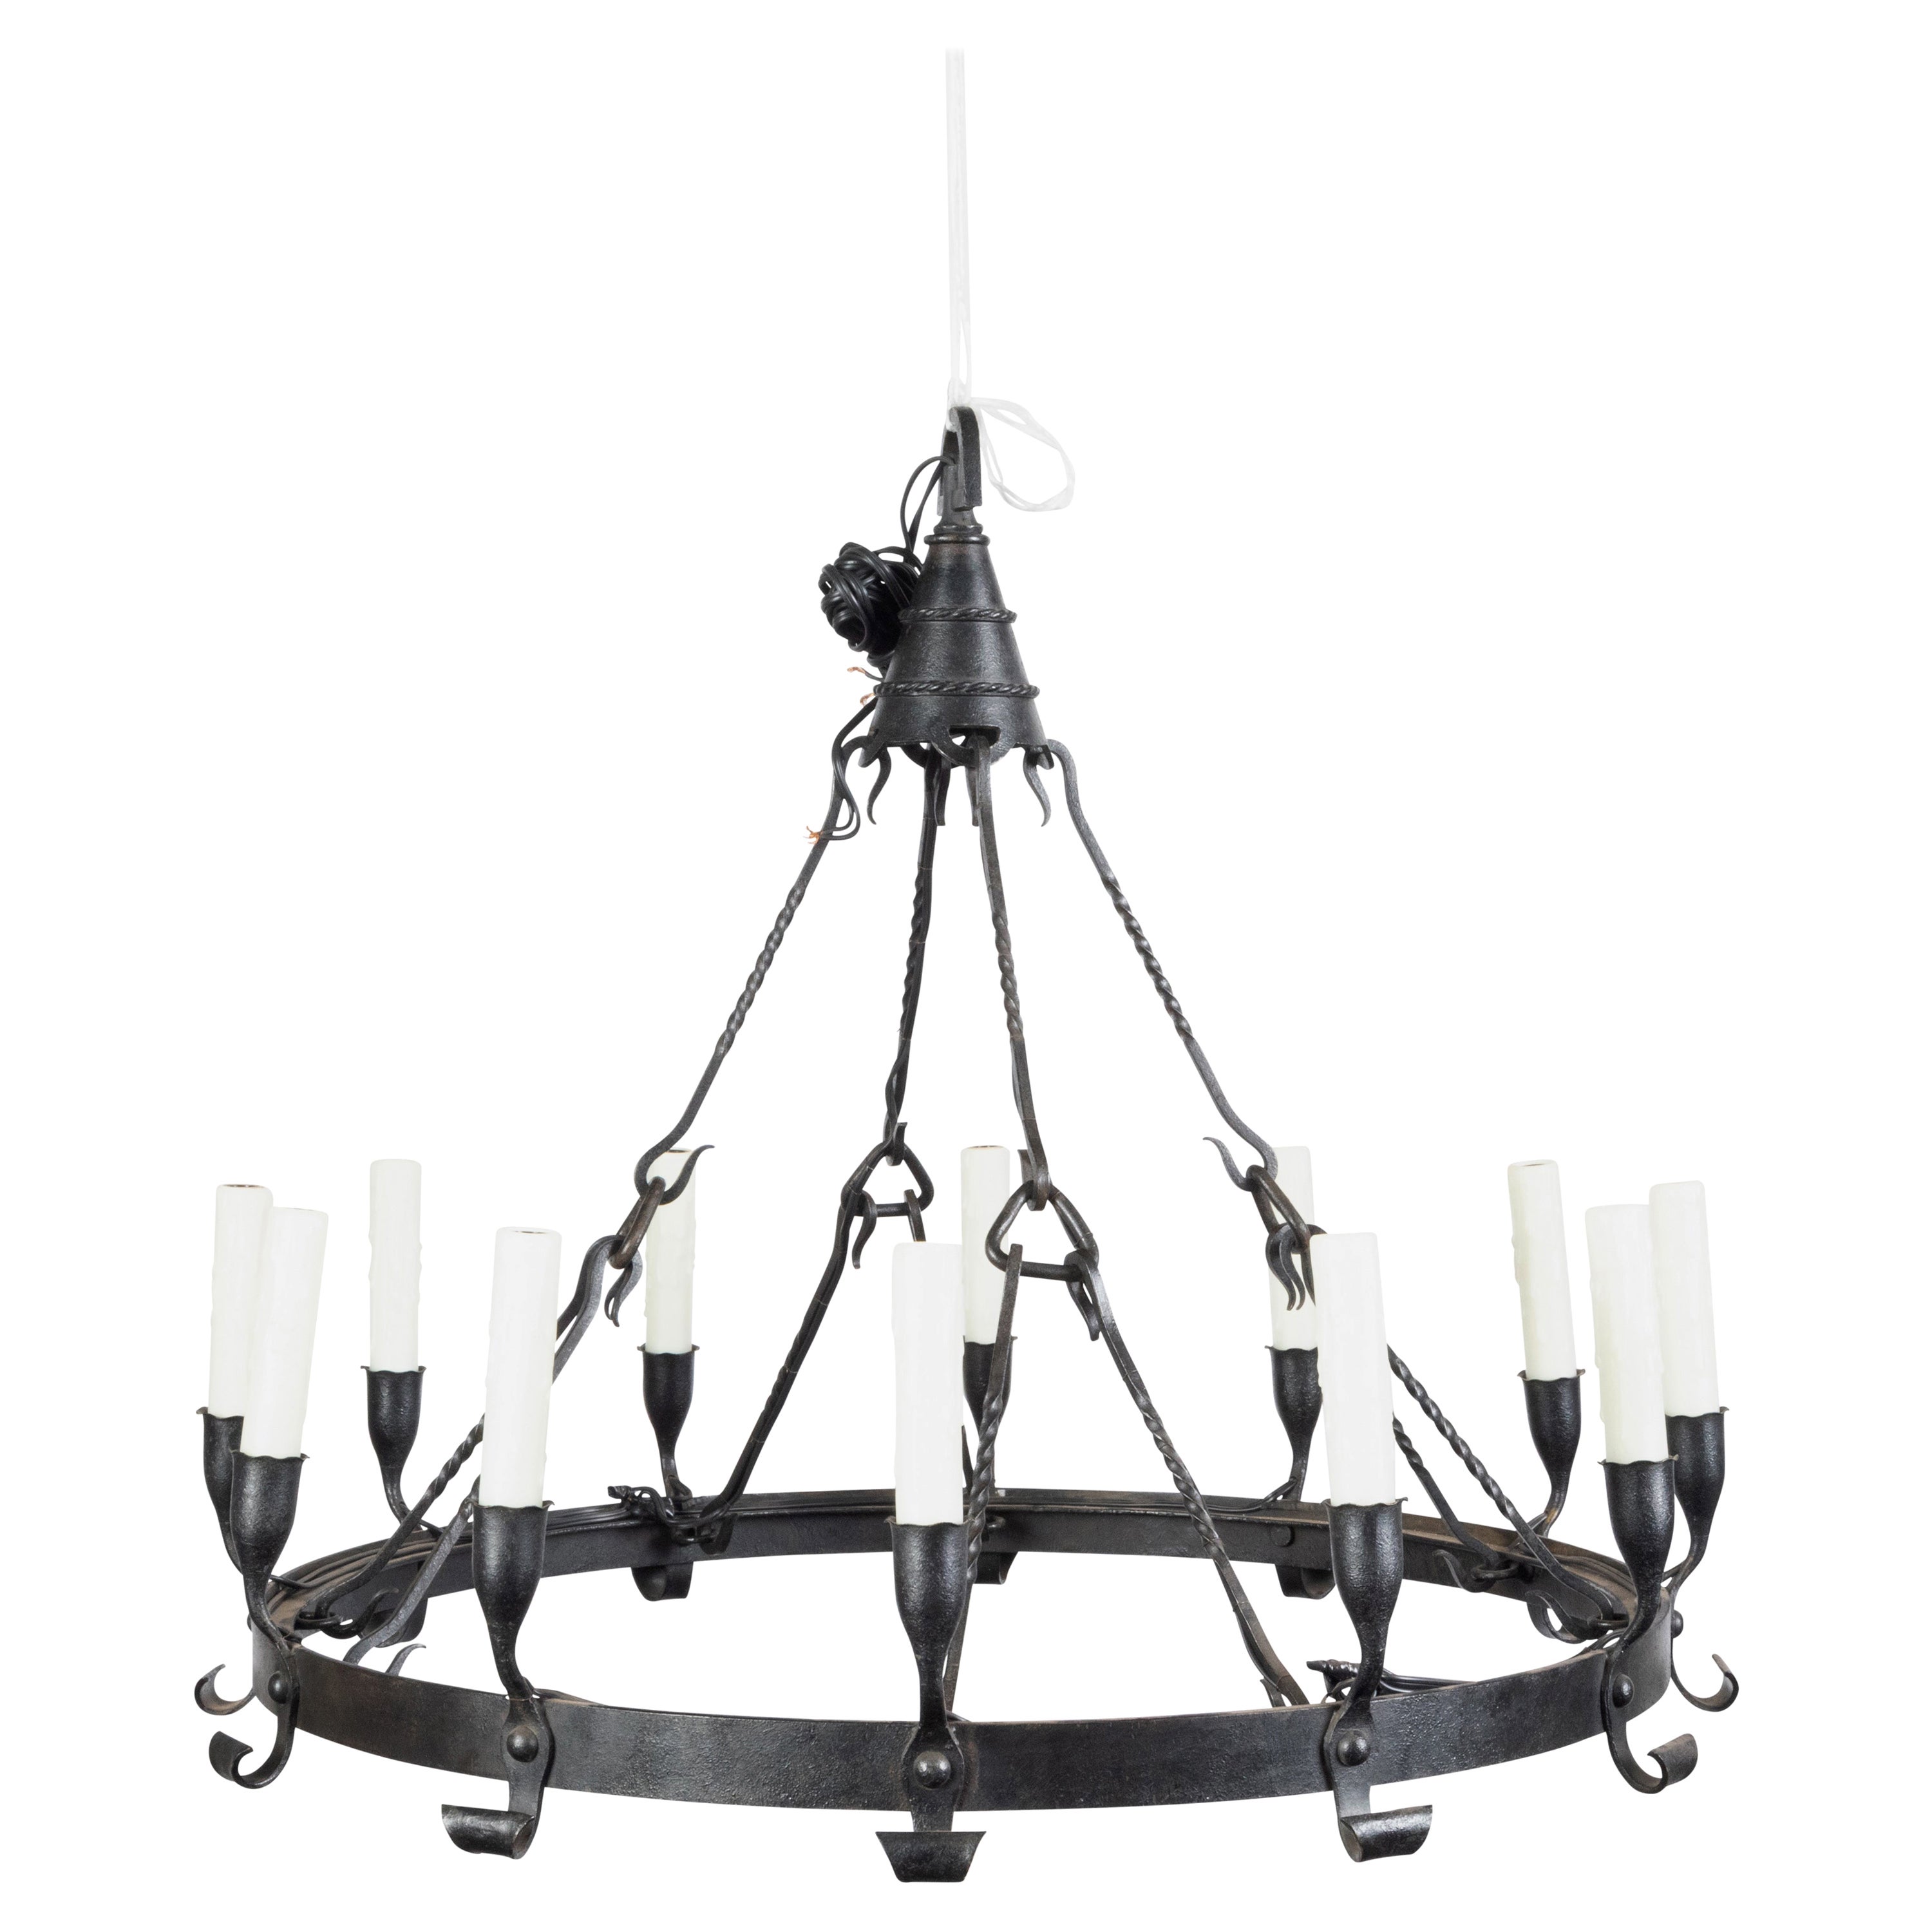 Spanish Colonial 1900s 12-Light Iron Chandelier with Ring and Dark Patina